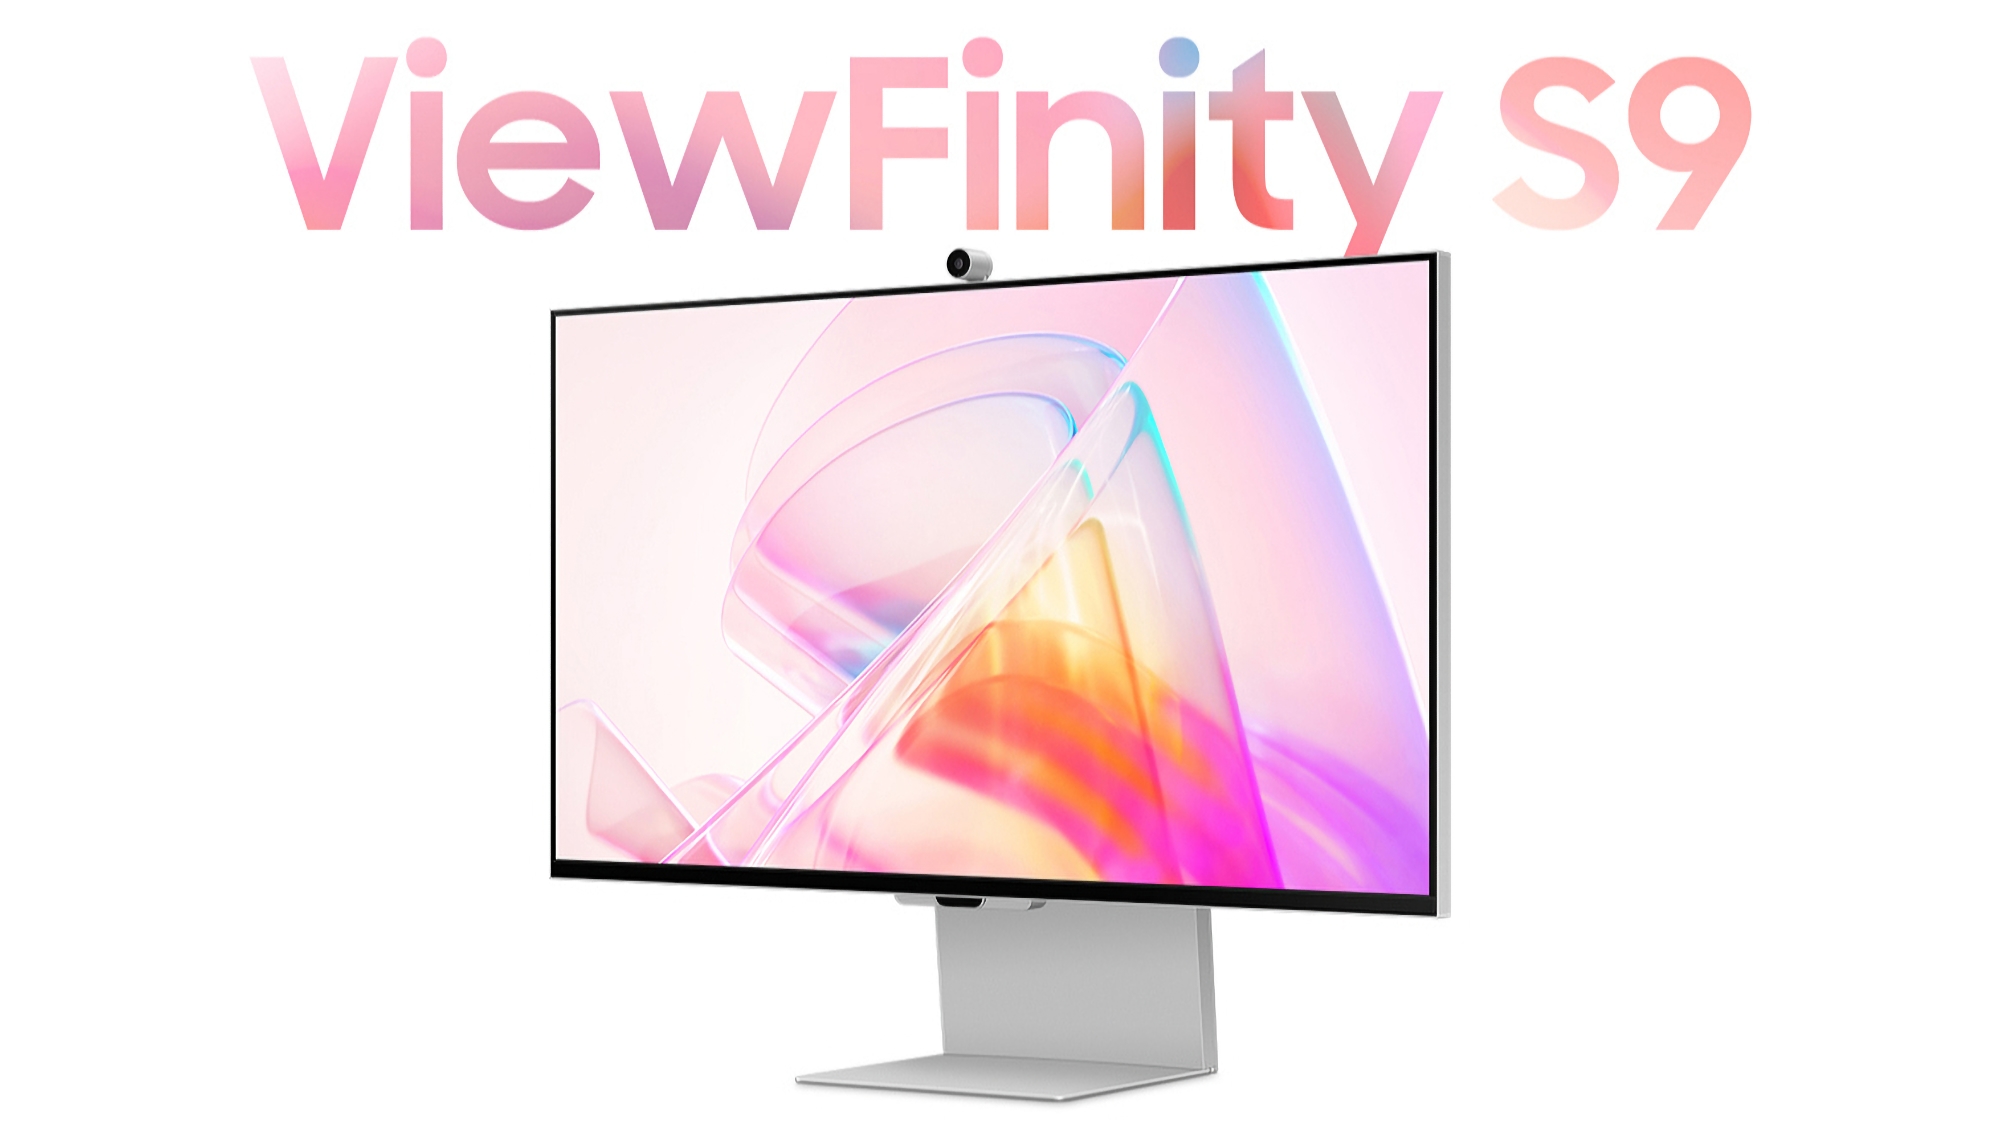 Limited time deal: Samsung ViewFinity S9 with matte display, webcam and Tizen TV OS can be bought on Amazon at a discounted price of $700